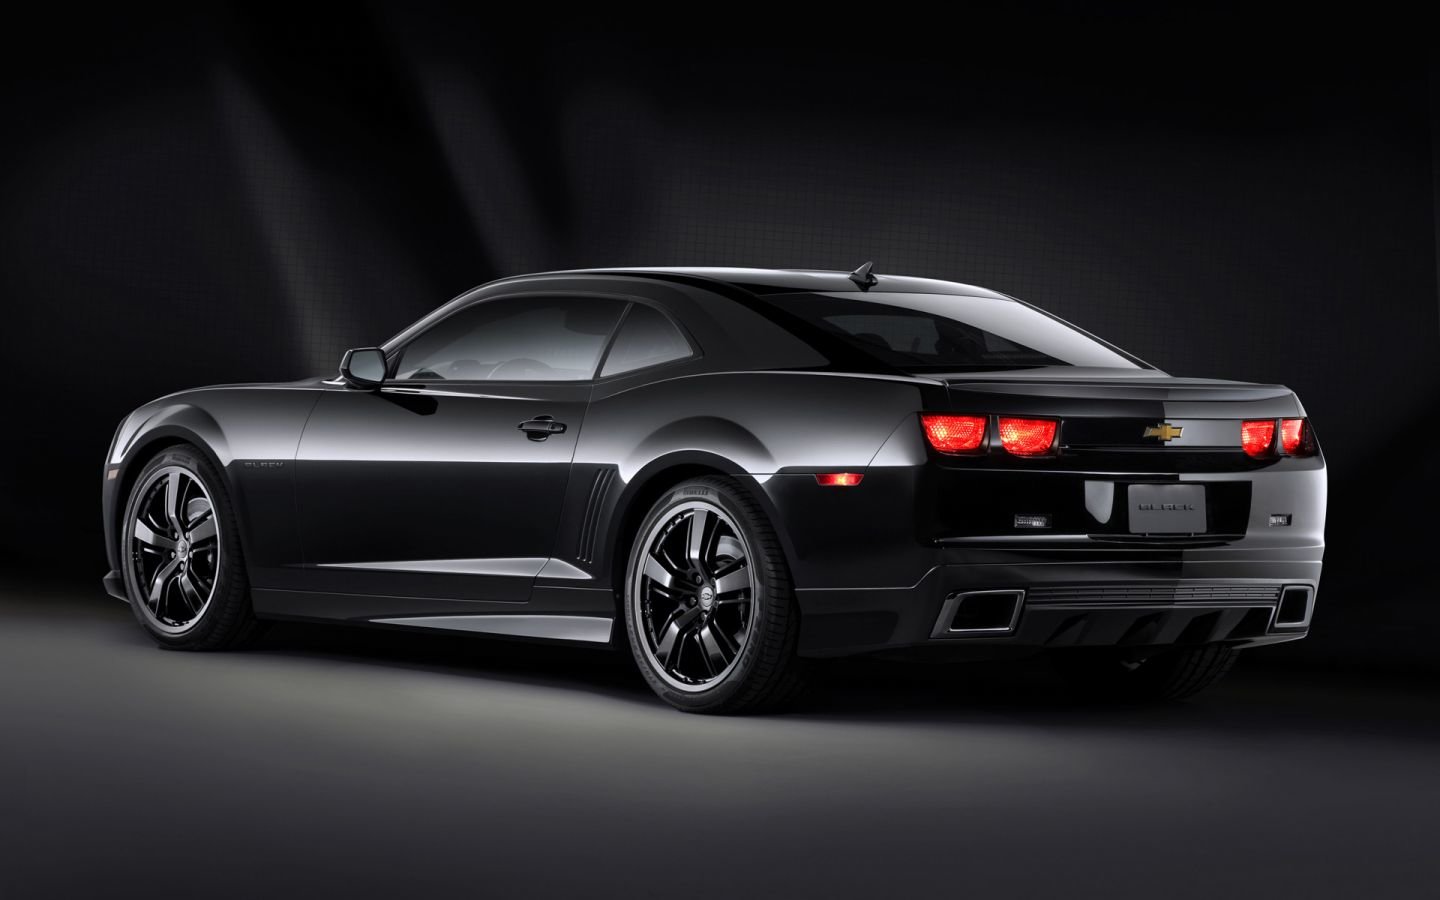 Best Chevrolet Camaro background ID:464757 for High Resolution hd 1440x900 computer